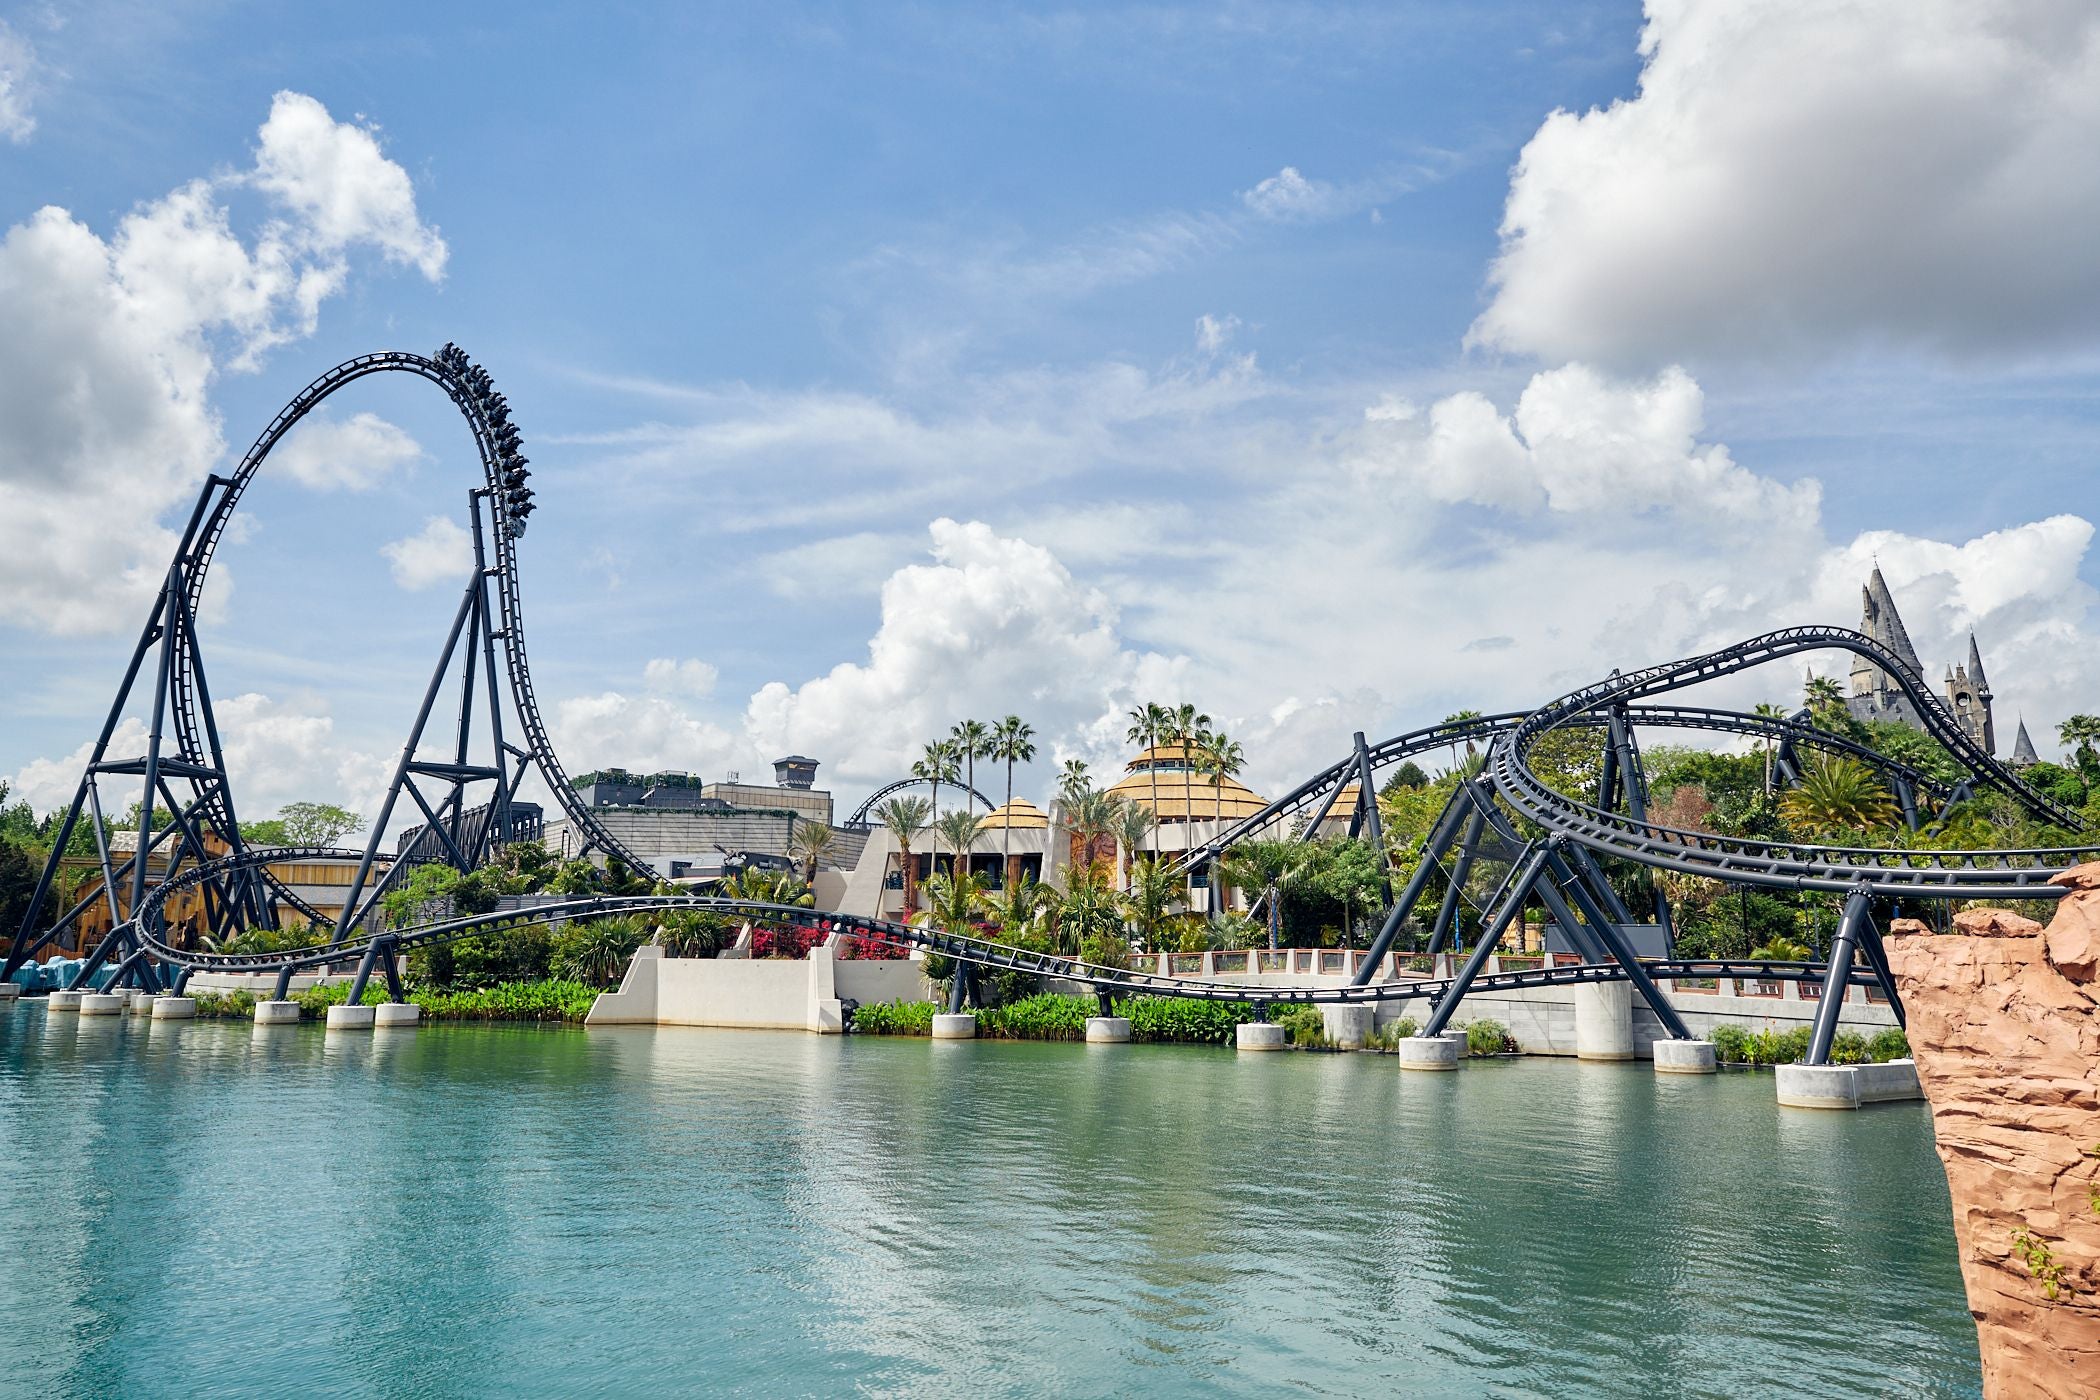 Jurassic World Velocicoaster photographed from the water